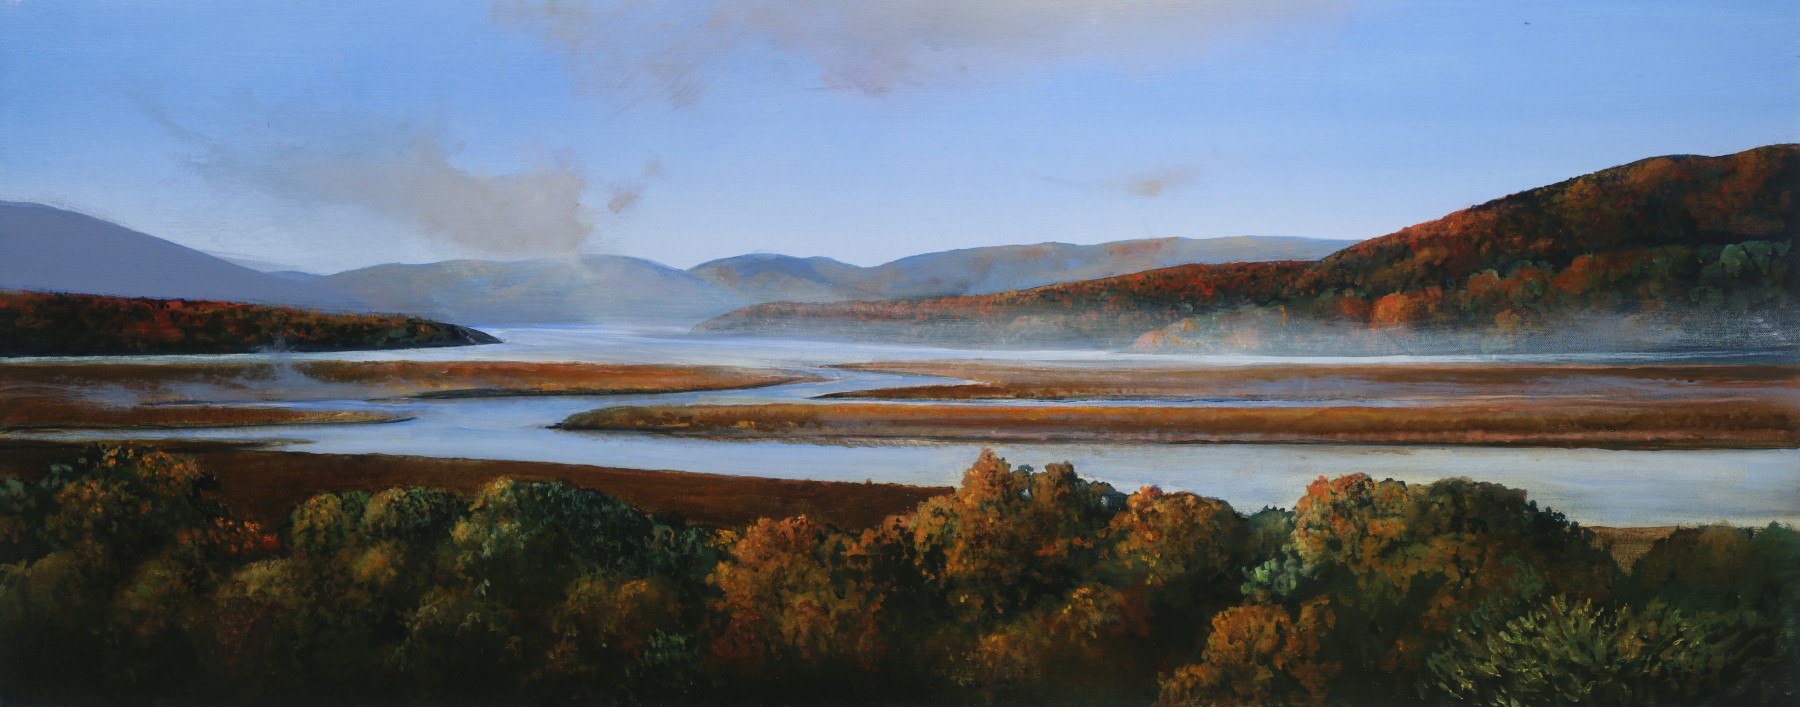 Michael&nbsp;Gregory October on the Hudson, 2020